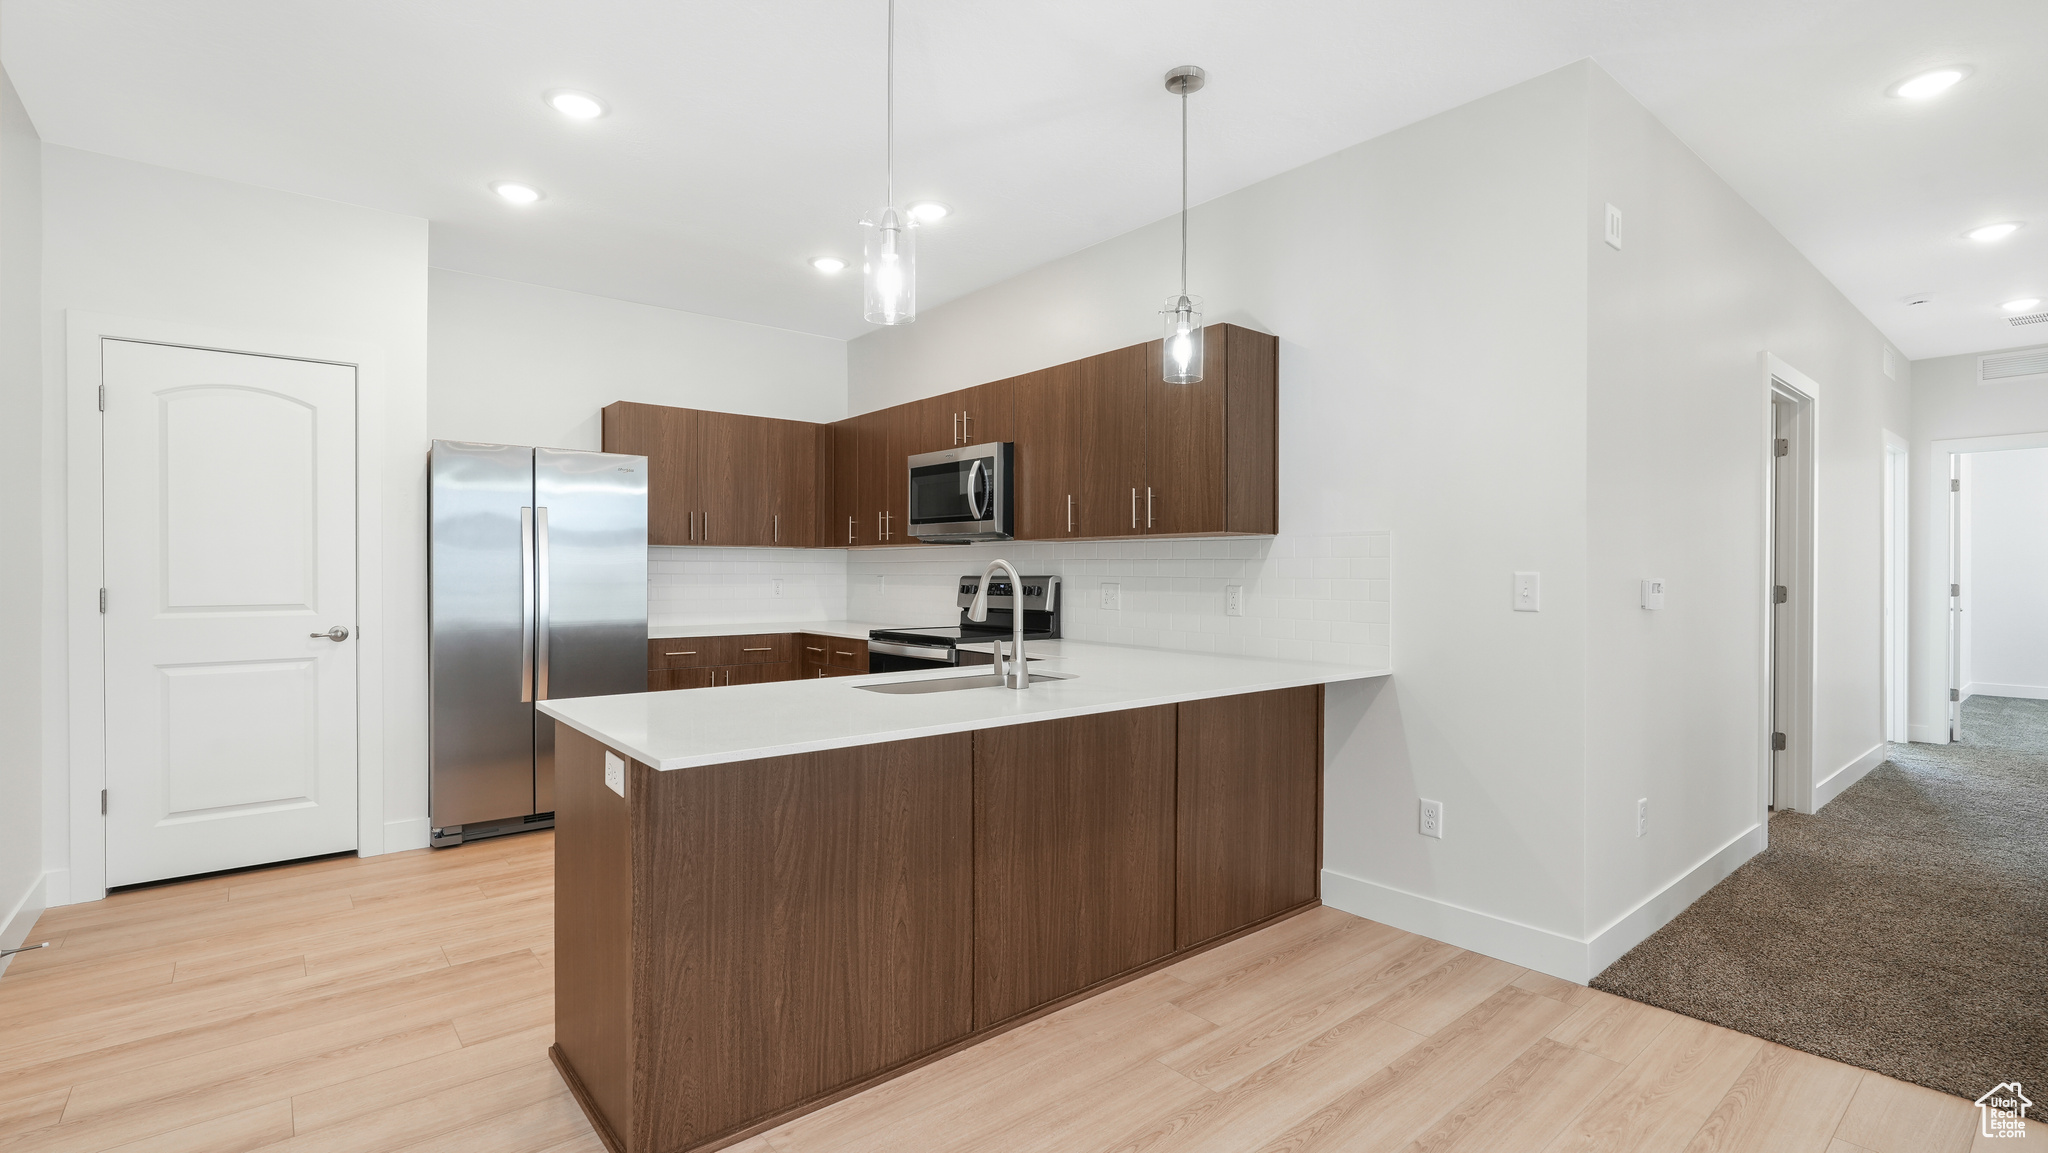 Beautiful modern kitchen with quartz counters, tile backsplash, and stainless steel appliances. Fridge Included!